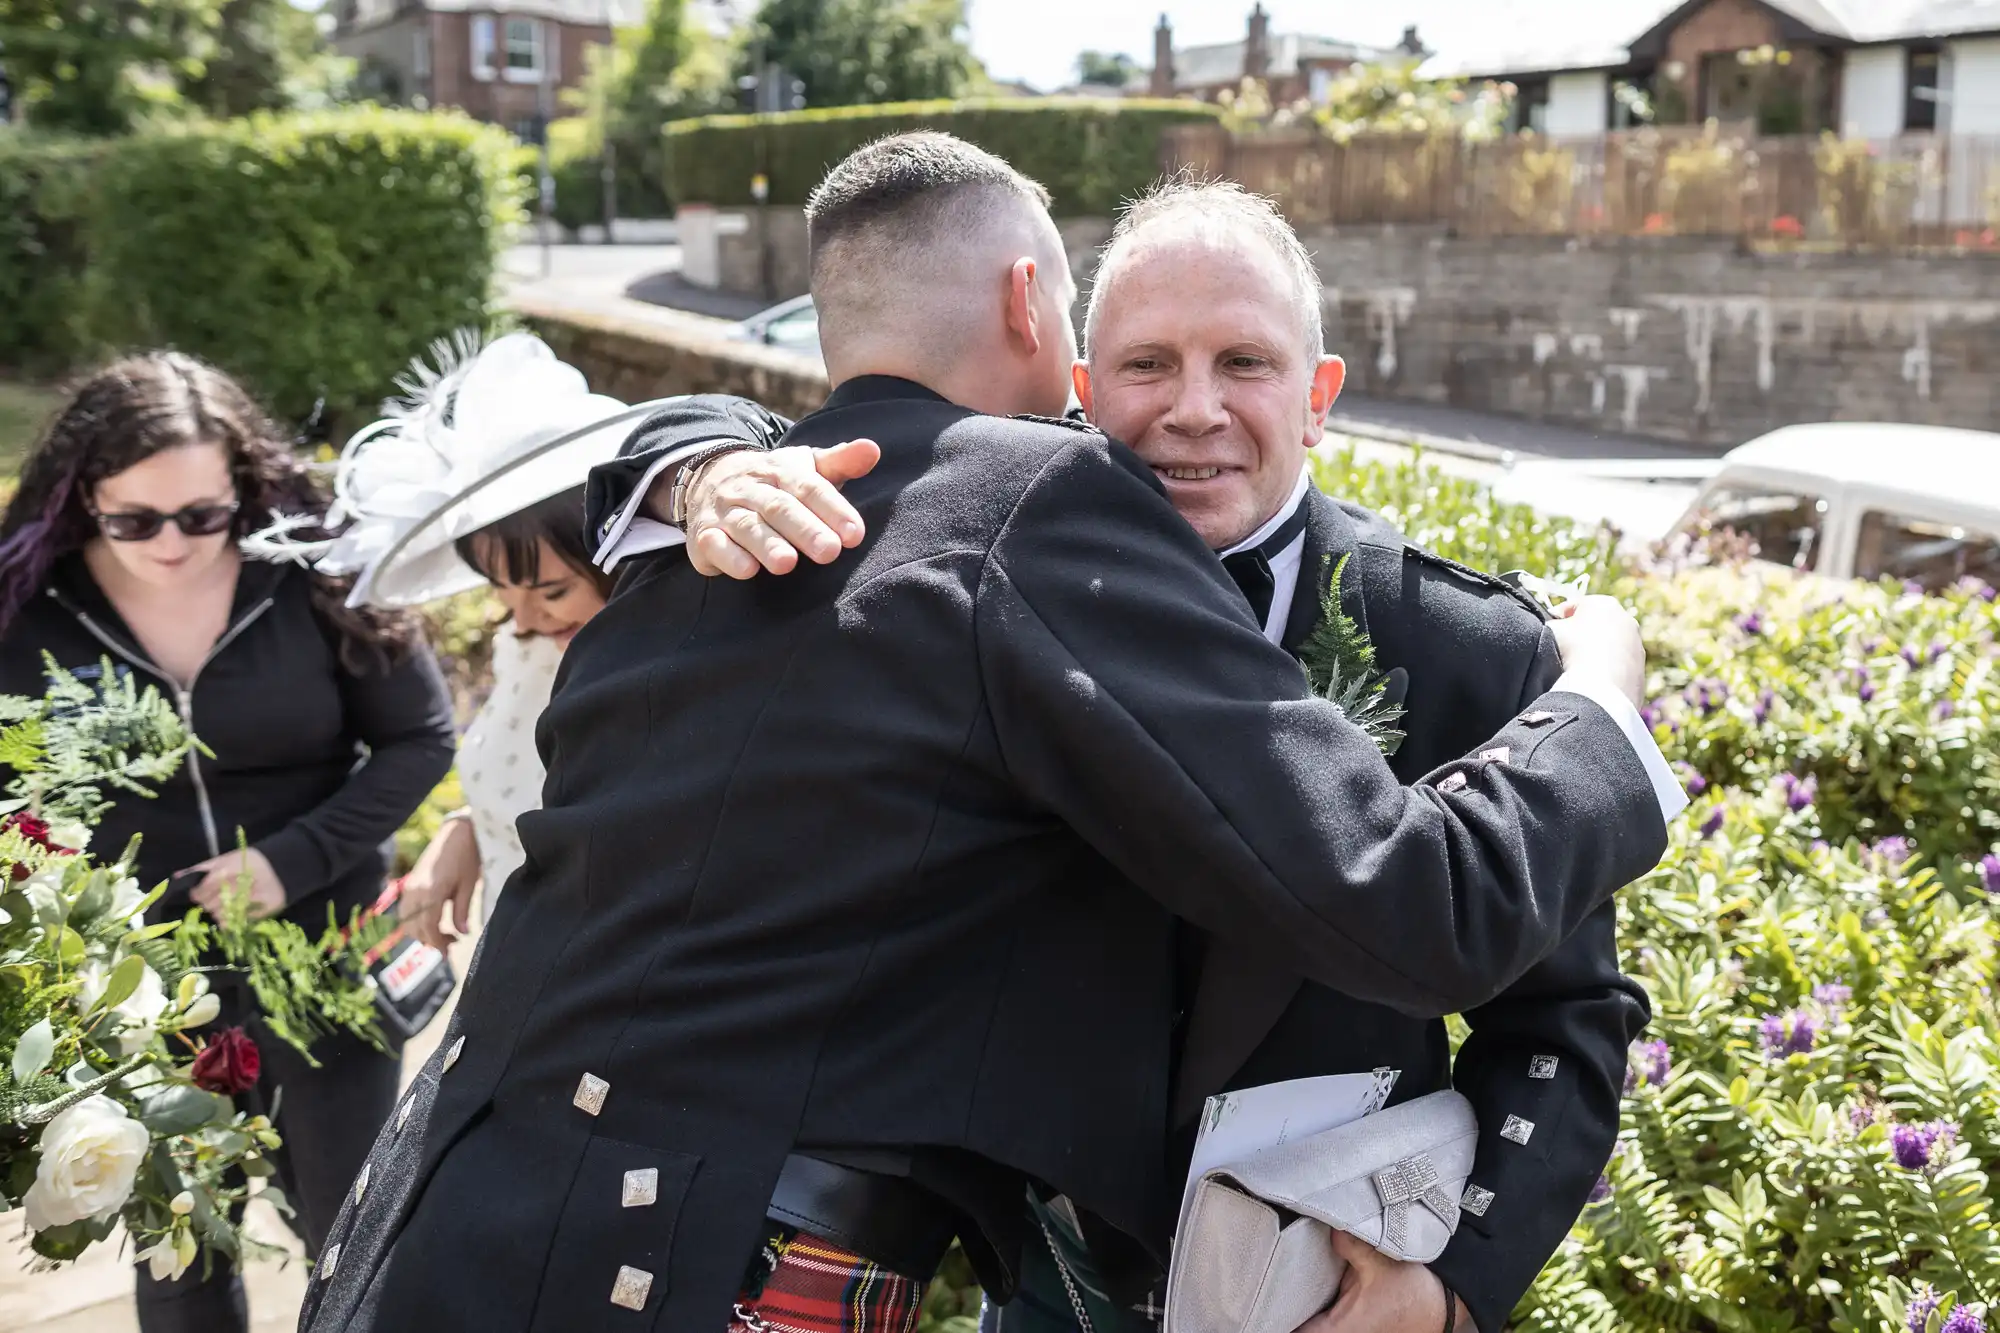 Two men embracing warmly at an outdoor gathering, one wearing a kilt and the other in a suit, with people and floral decorations in the background.